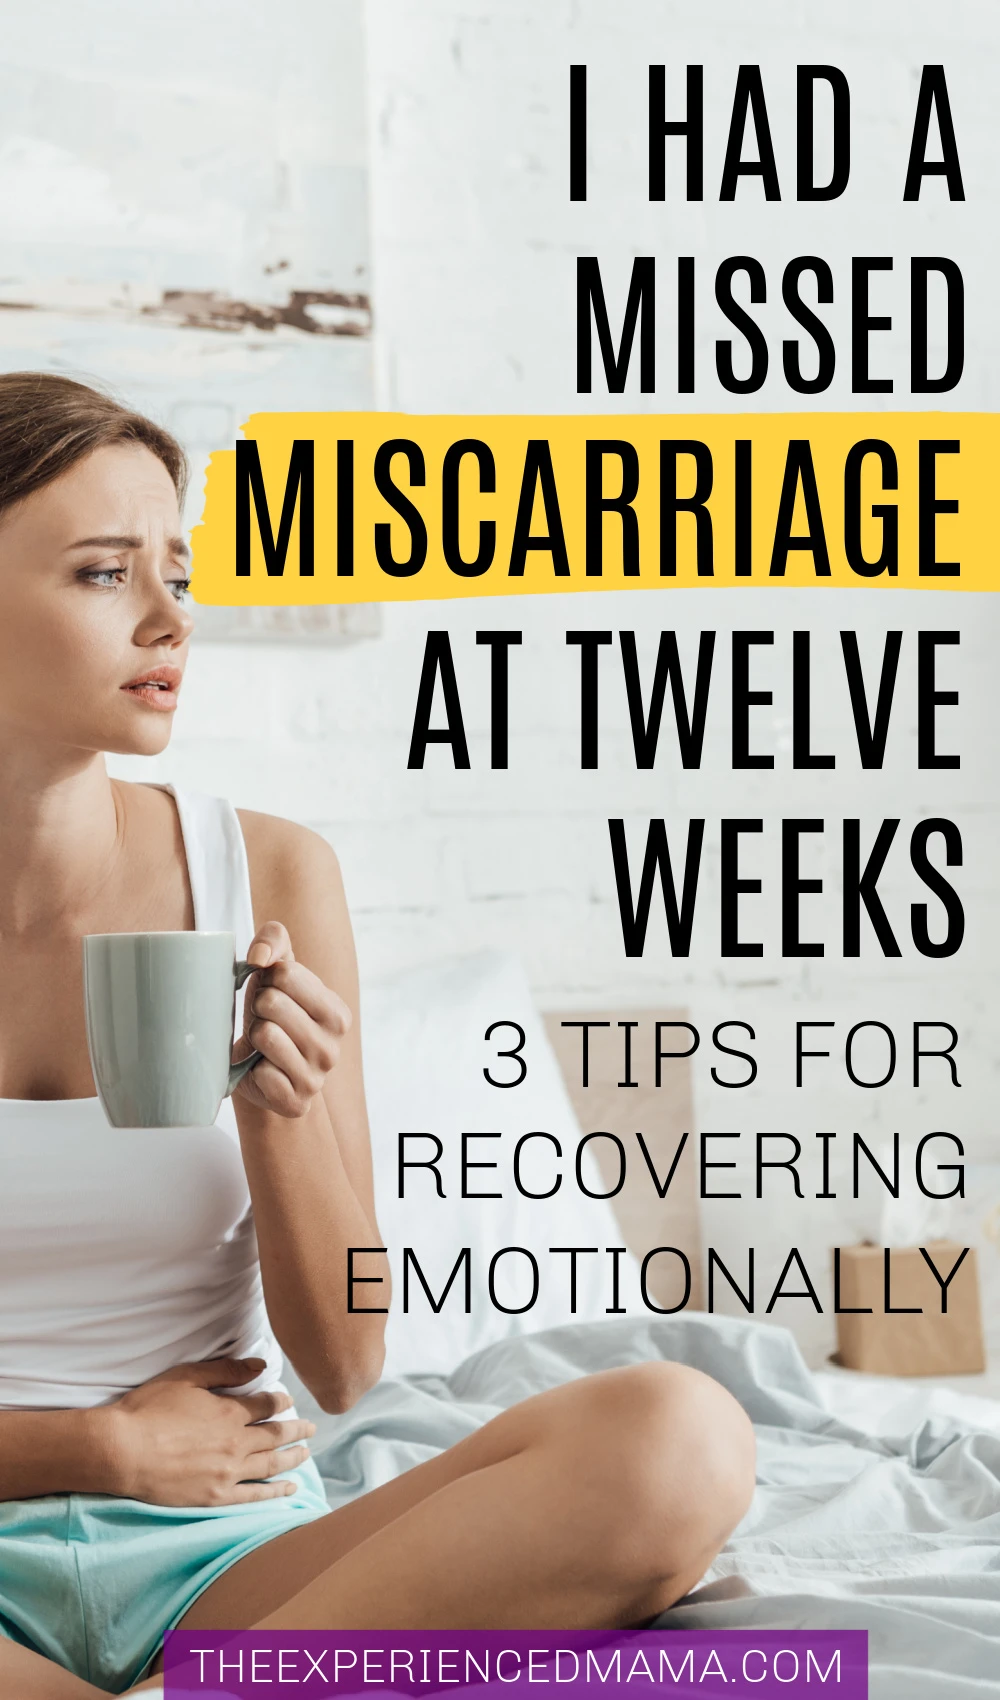 sad woman who recently had a miscarriage holding stomach and drinking tea, with text overlay "I had a missed miscarriage at twelve weeks".